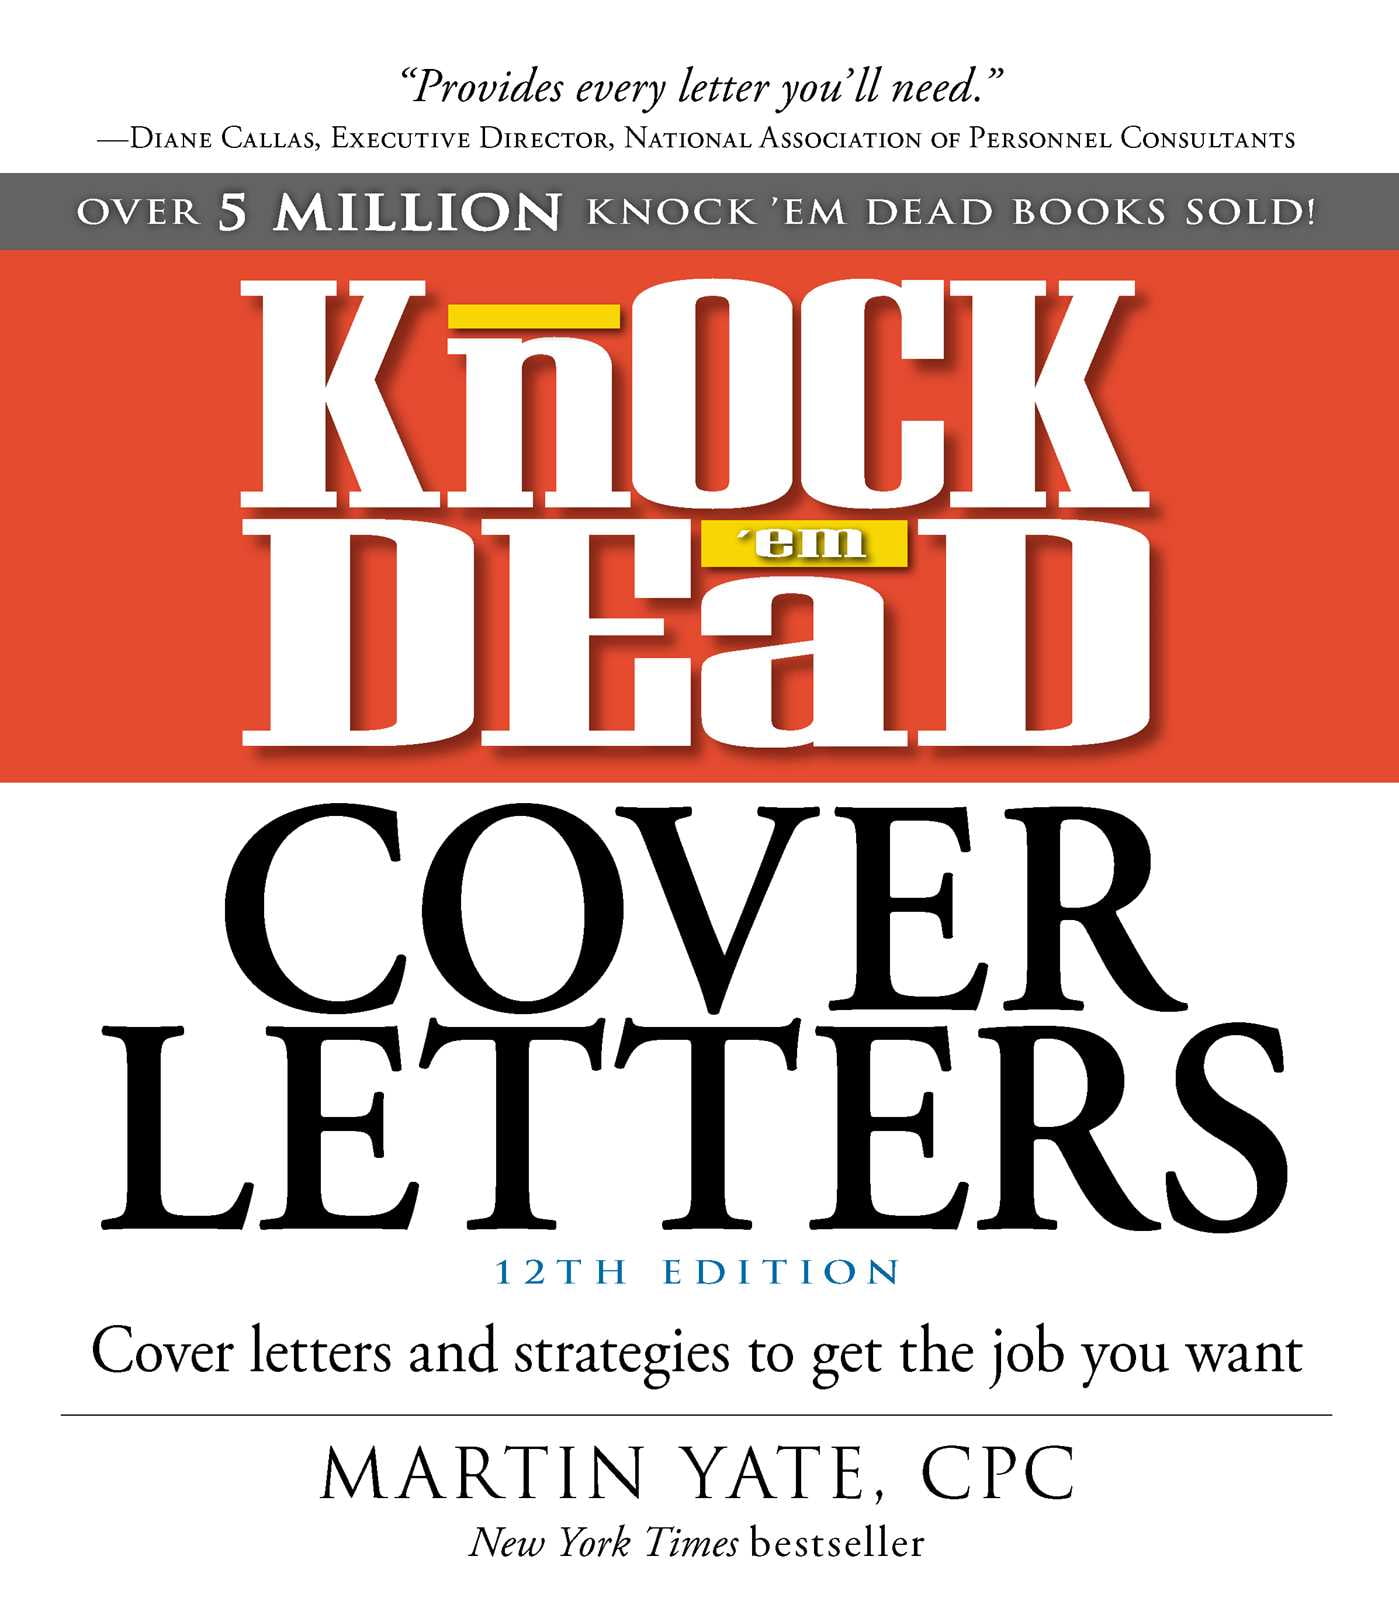 Knock-em-Dead-Cover-Letters-Cover-Letters-and-Strategies-to-Get-the-Job-You-Want